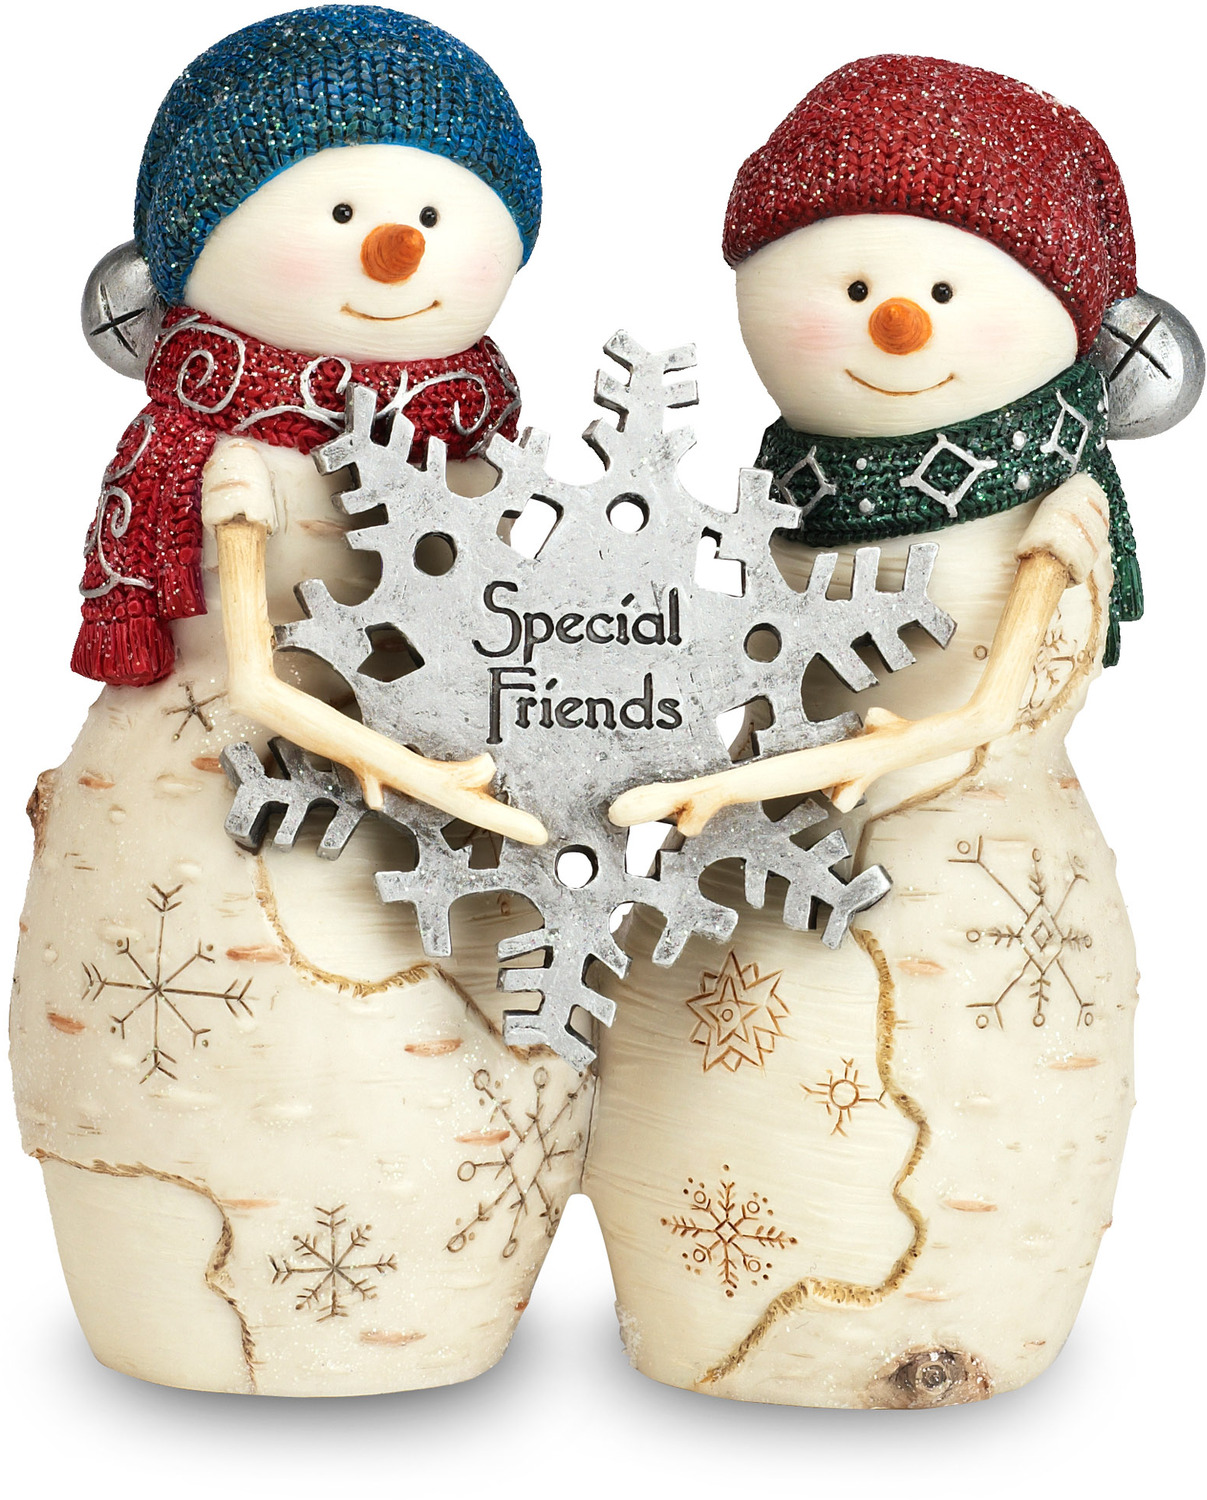 Special Friends by The Birchhearts - Special Friends - 4.5" Snowmen w/Snowflake